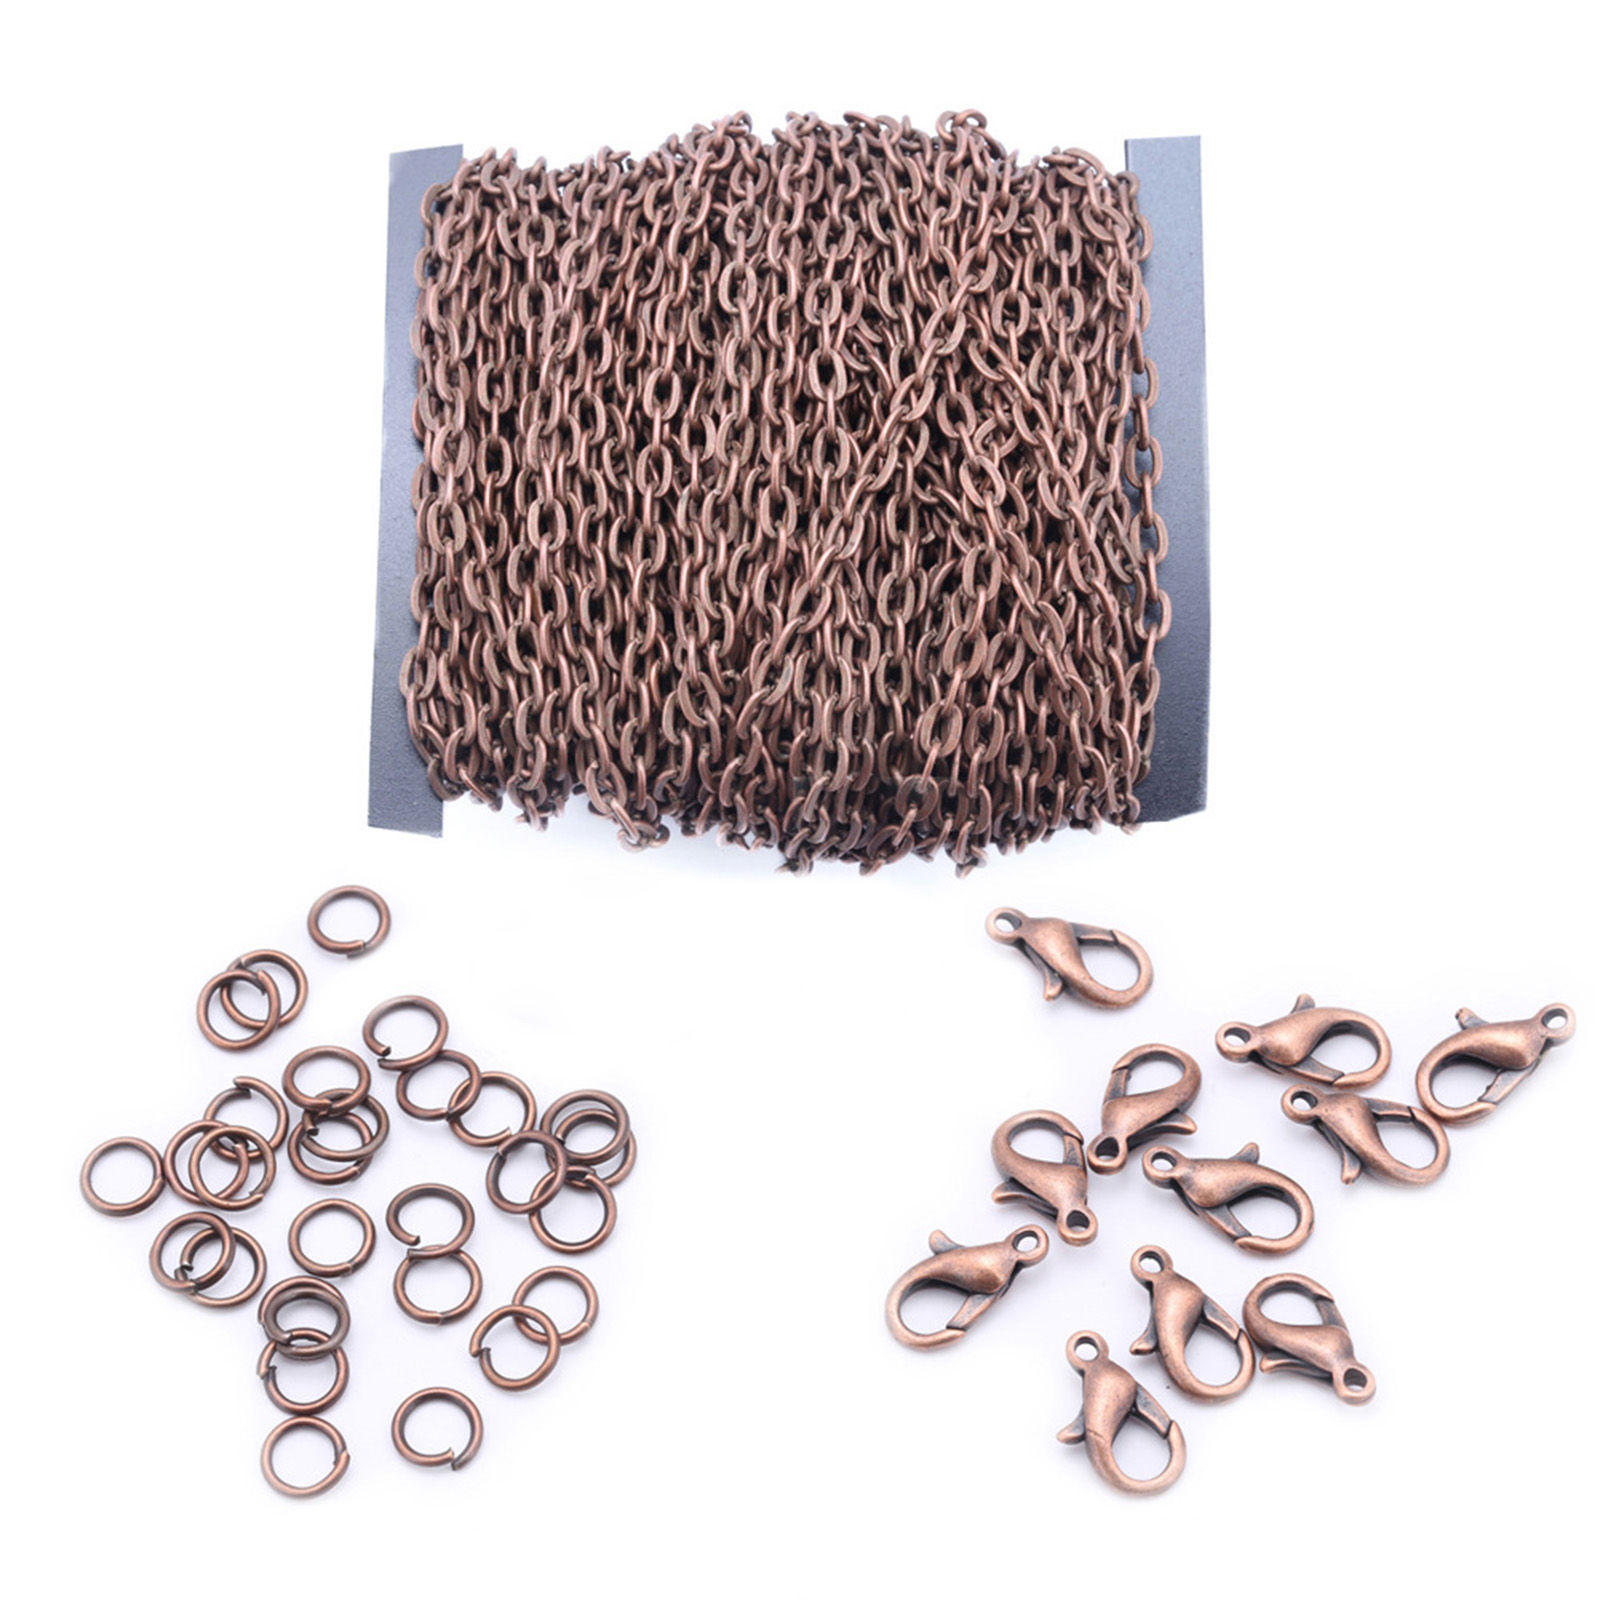 Picture of Iron Based Alloy Jewelry DIY Earring Necklace Bracelet 3x2mm Chain Lobster Clasp Jump Ring Accessories Findings Antique Copper 15cm x 12cm, 1 Set